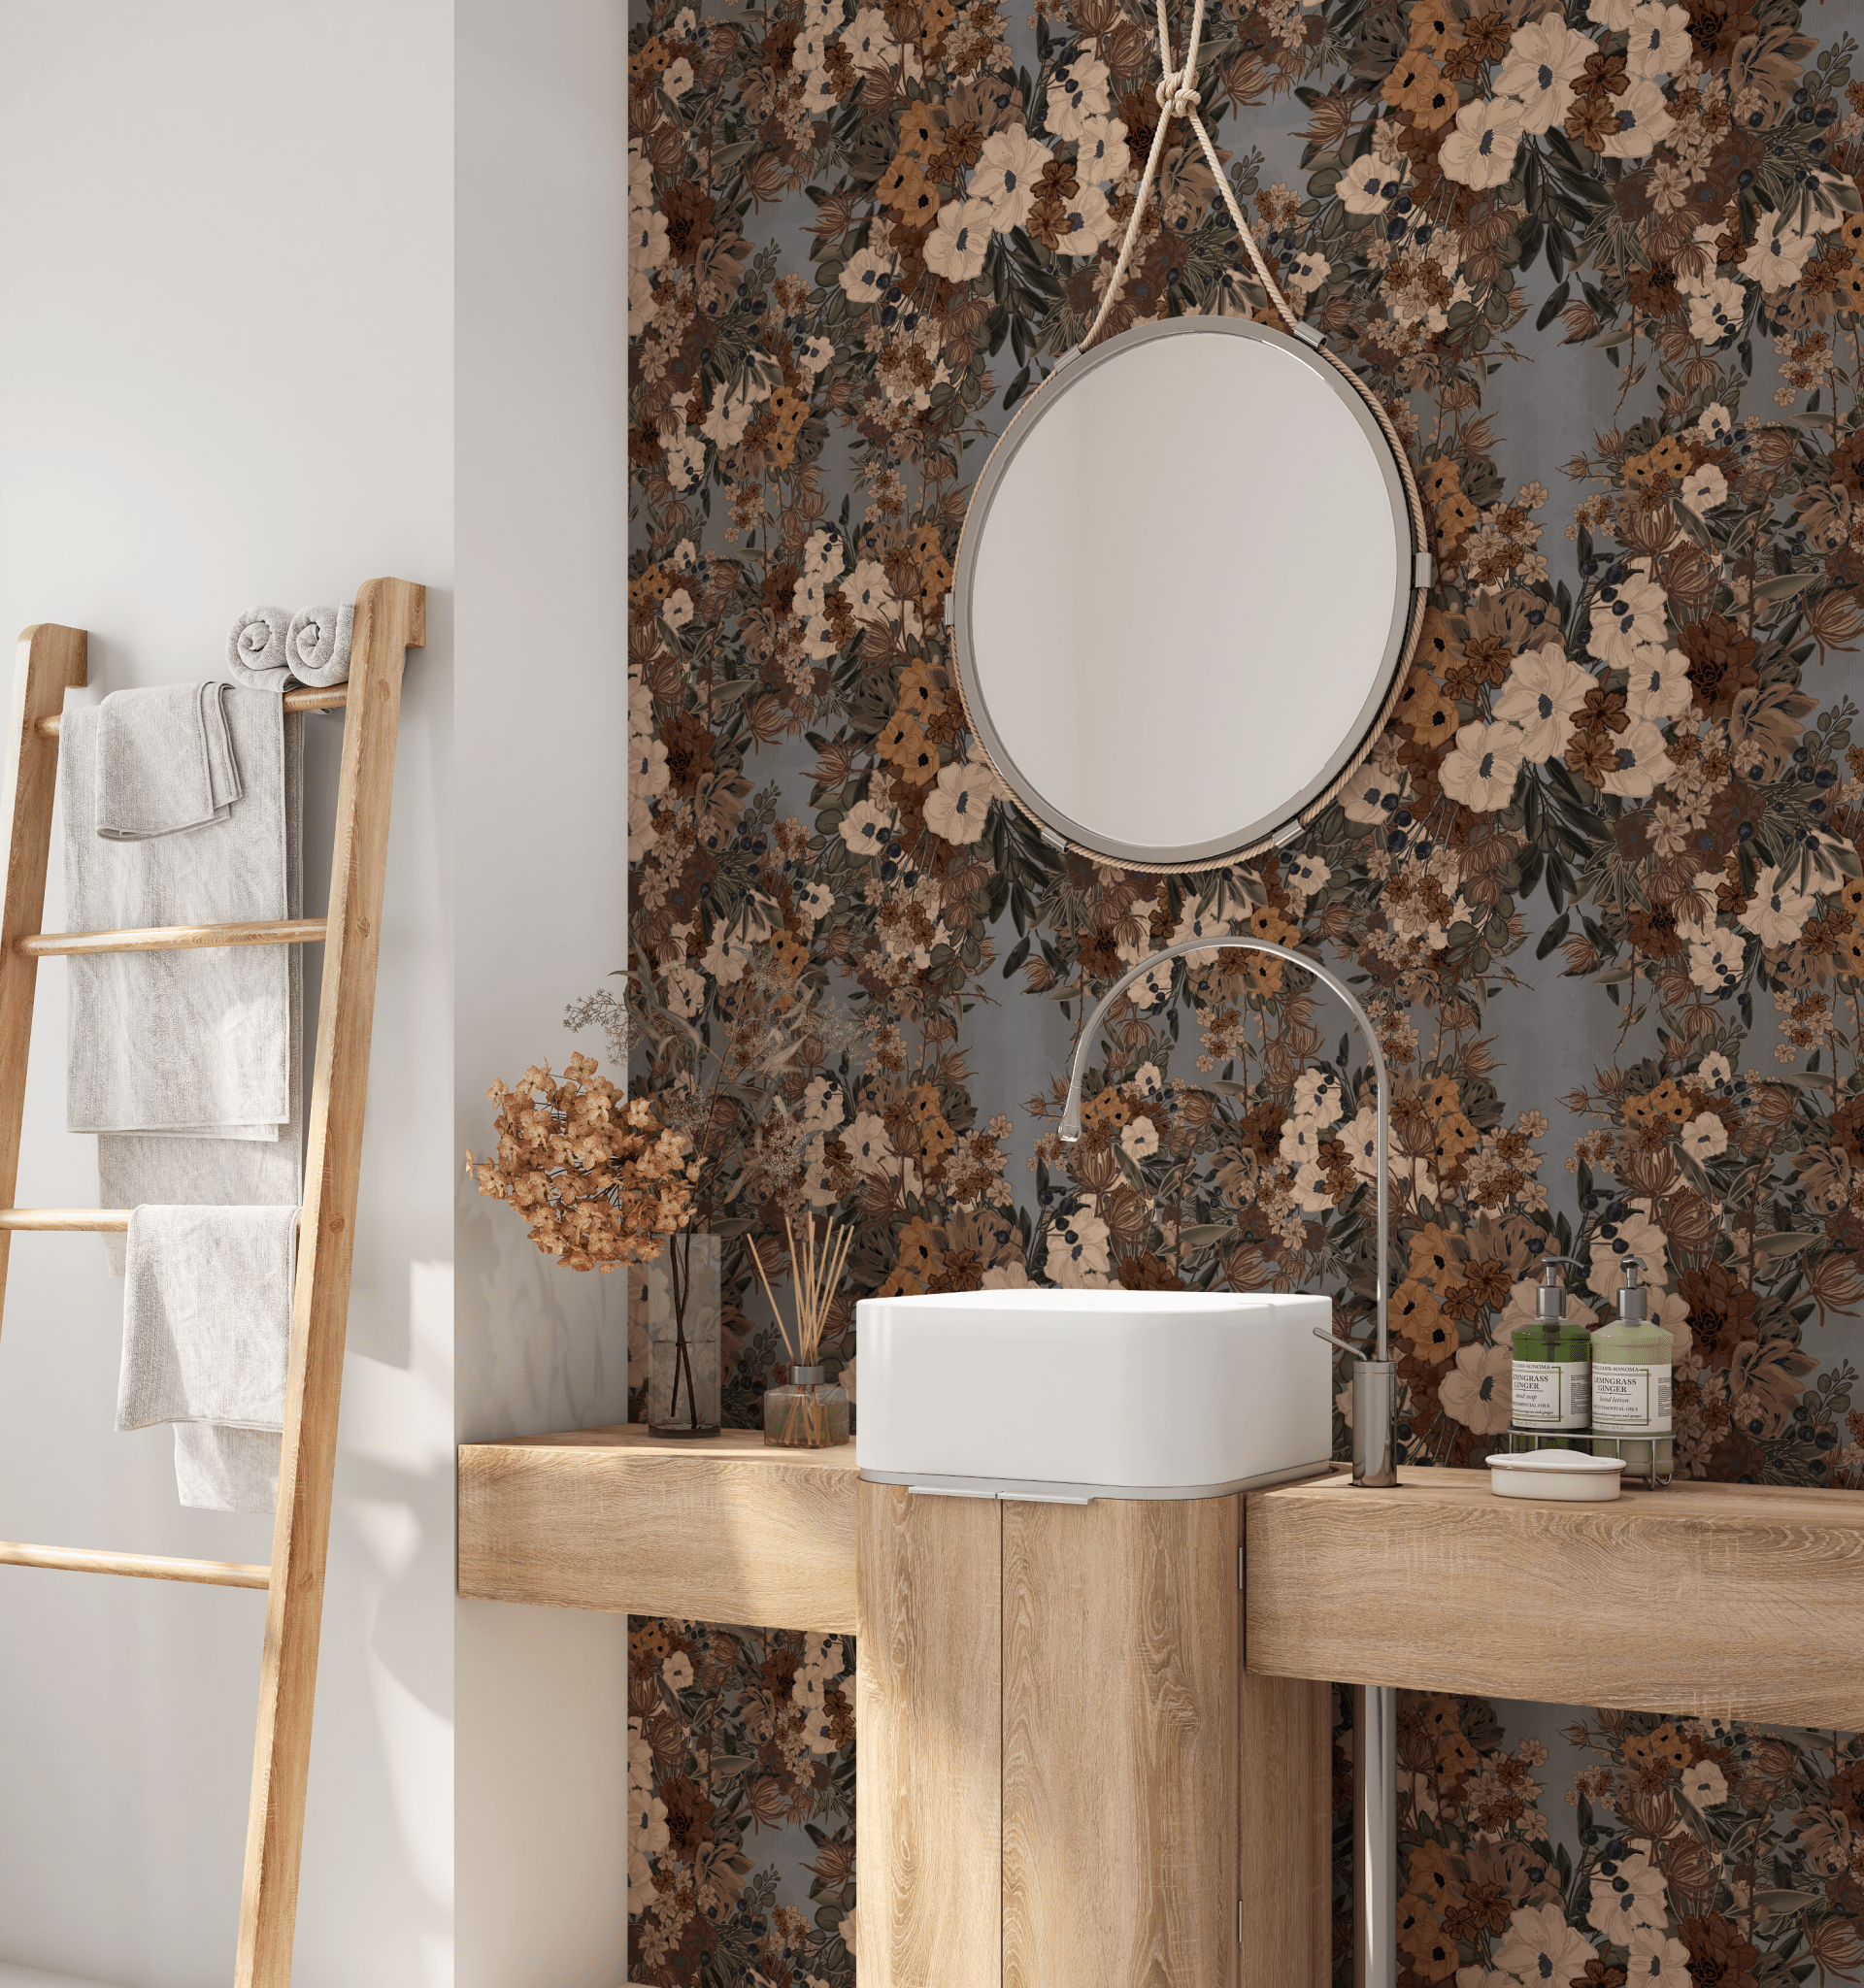 A bathroom featuring a round mirror above a white basin, set against a wall adorned with classic floral wallpaper in earth tones.